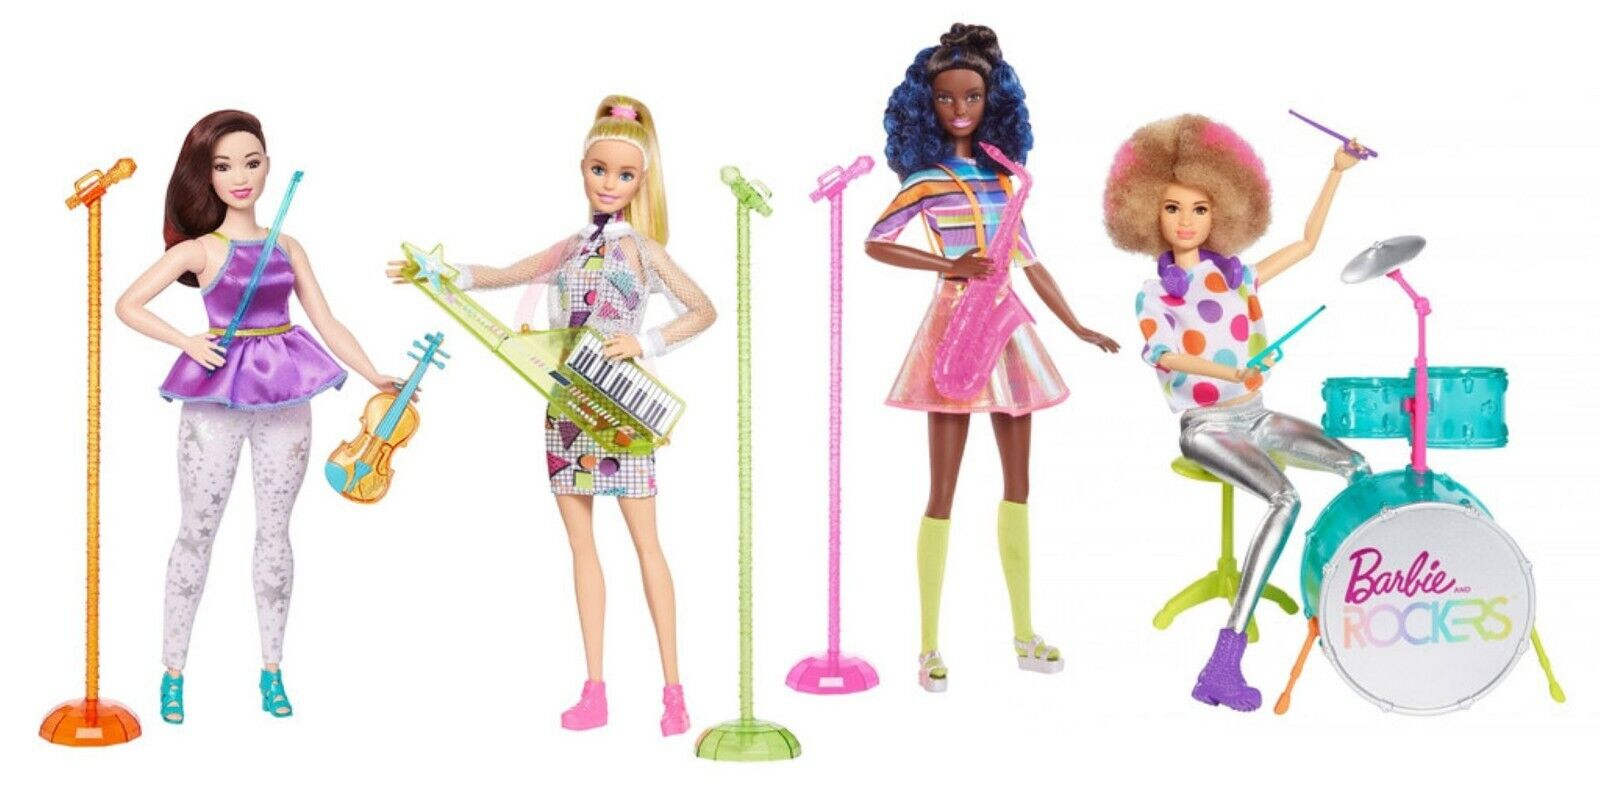 Barbie® and the Rockers dolls 2017